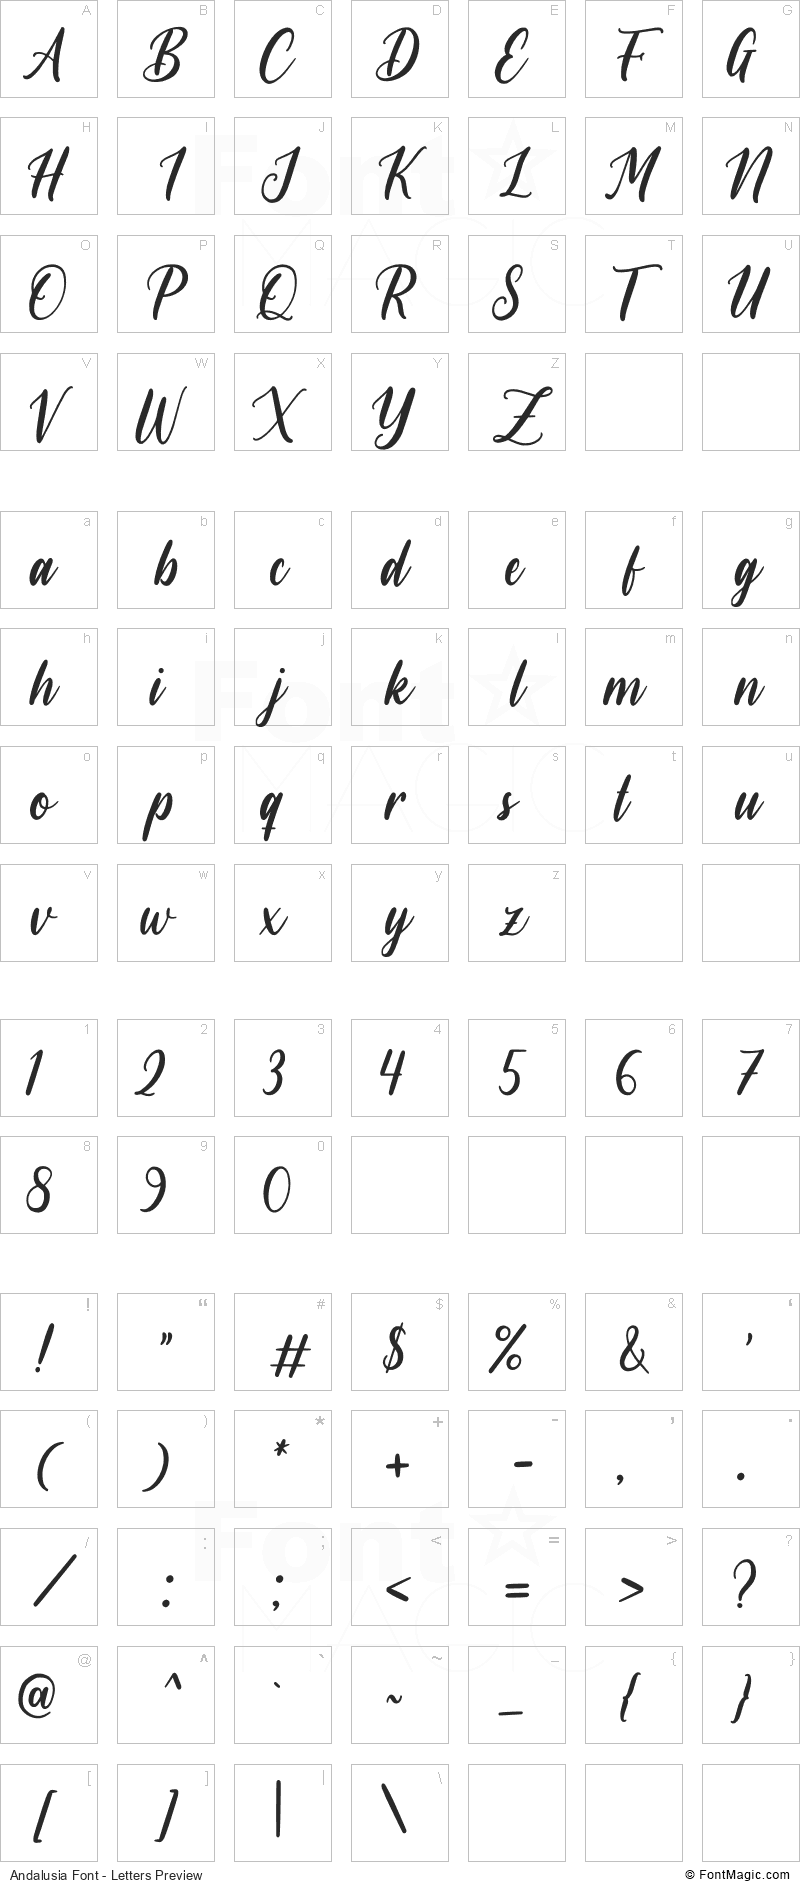 Andalusia Font - All Latters Preview Chart